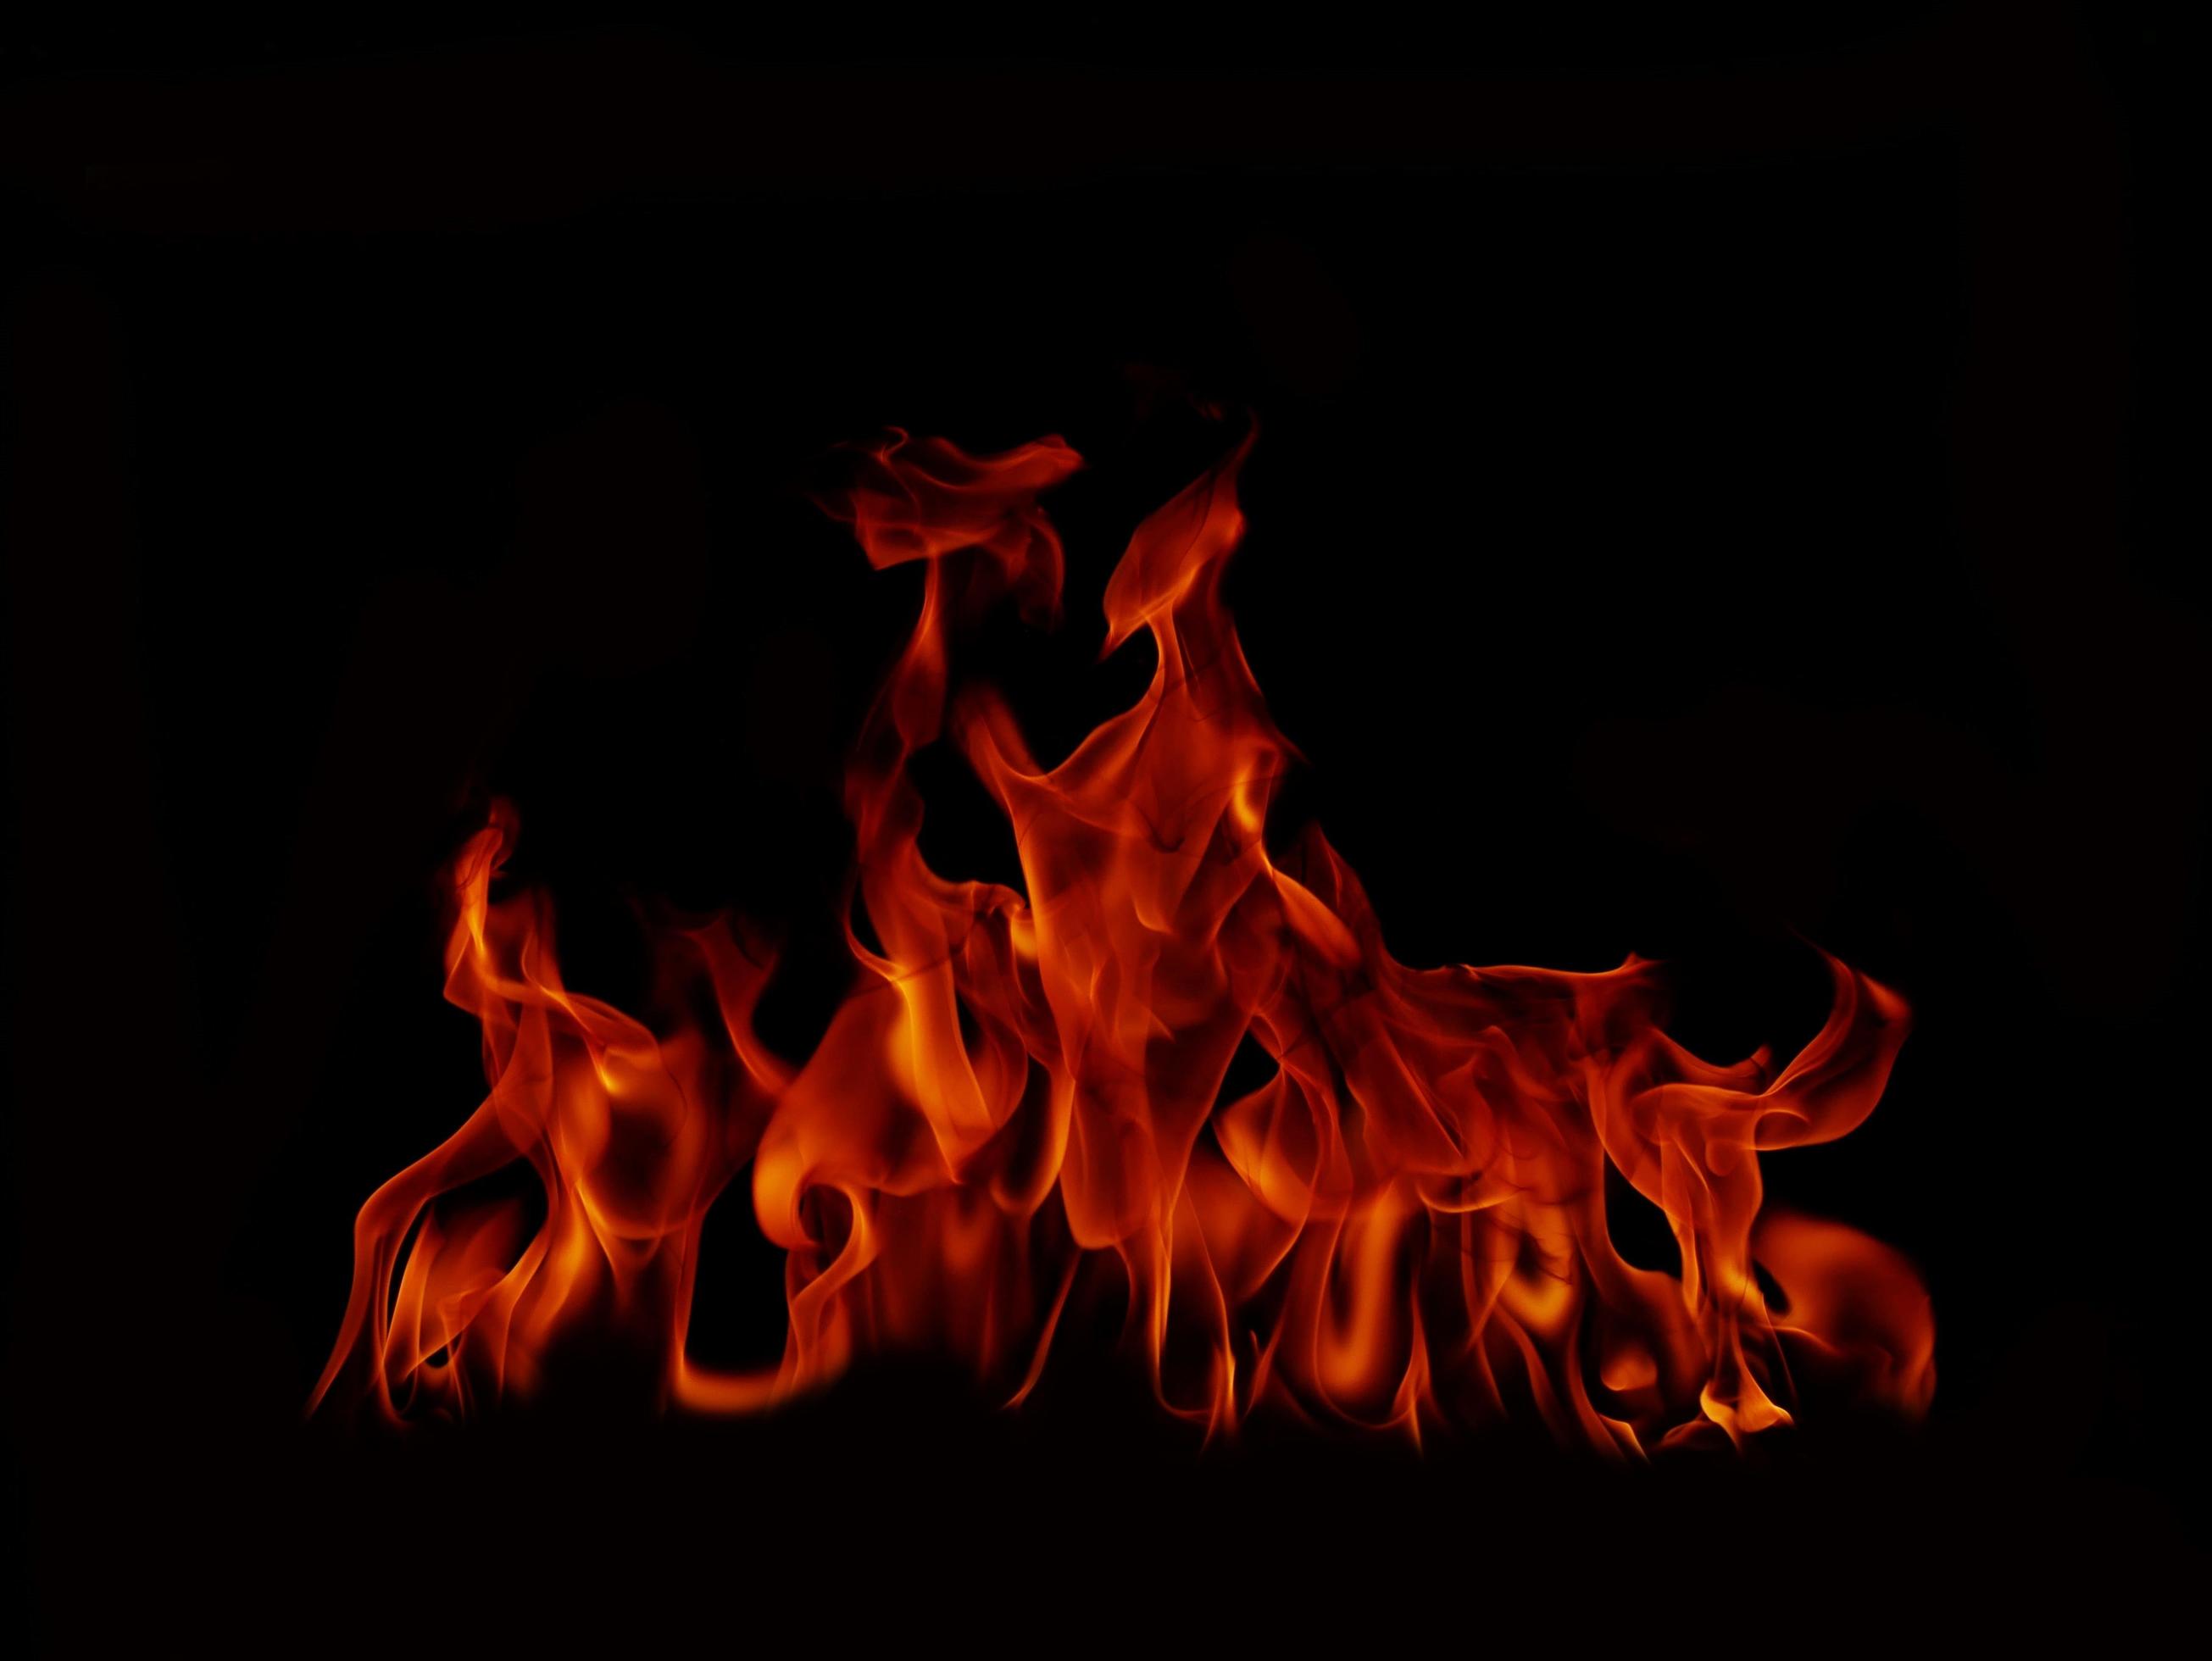 Flame Flame Texture For Strange Shape Fire Background Flame meat that is  burned from the stove or from cooking. danger feeling abstract black  background Suitable for banners or advertisements. 8165005 Stock Photo